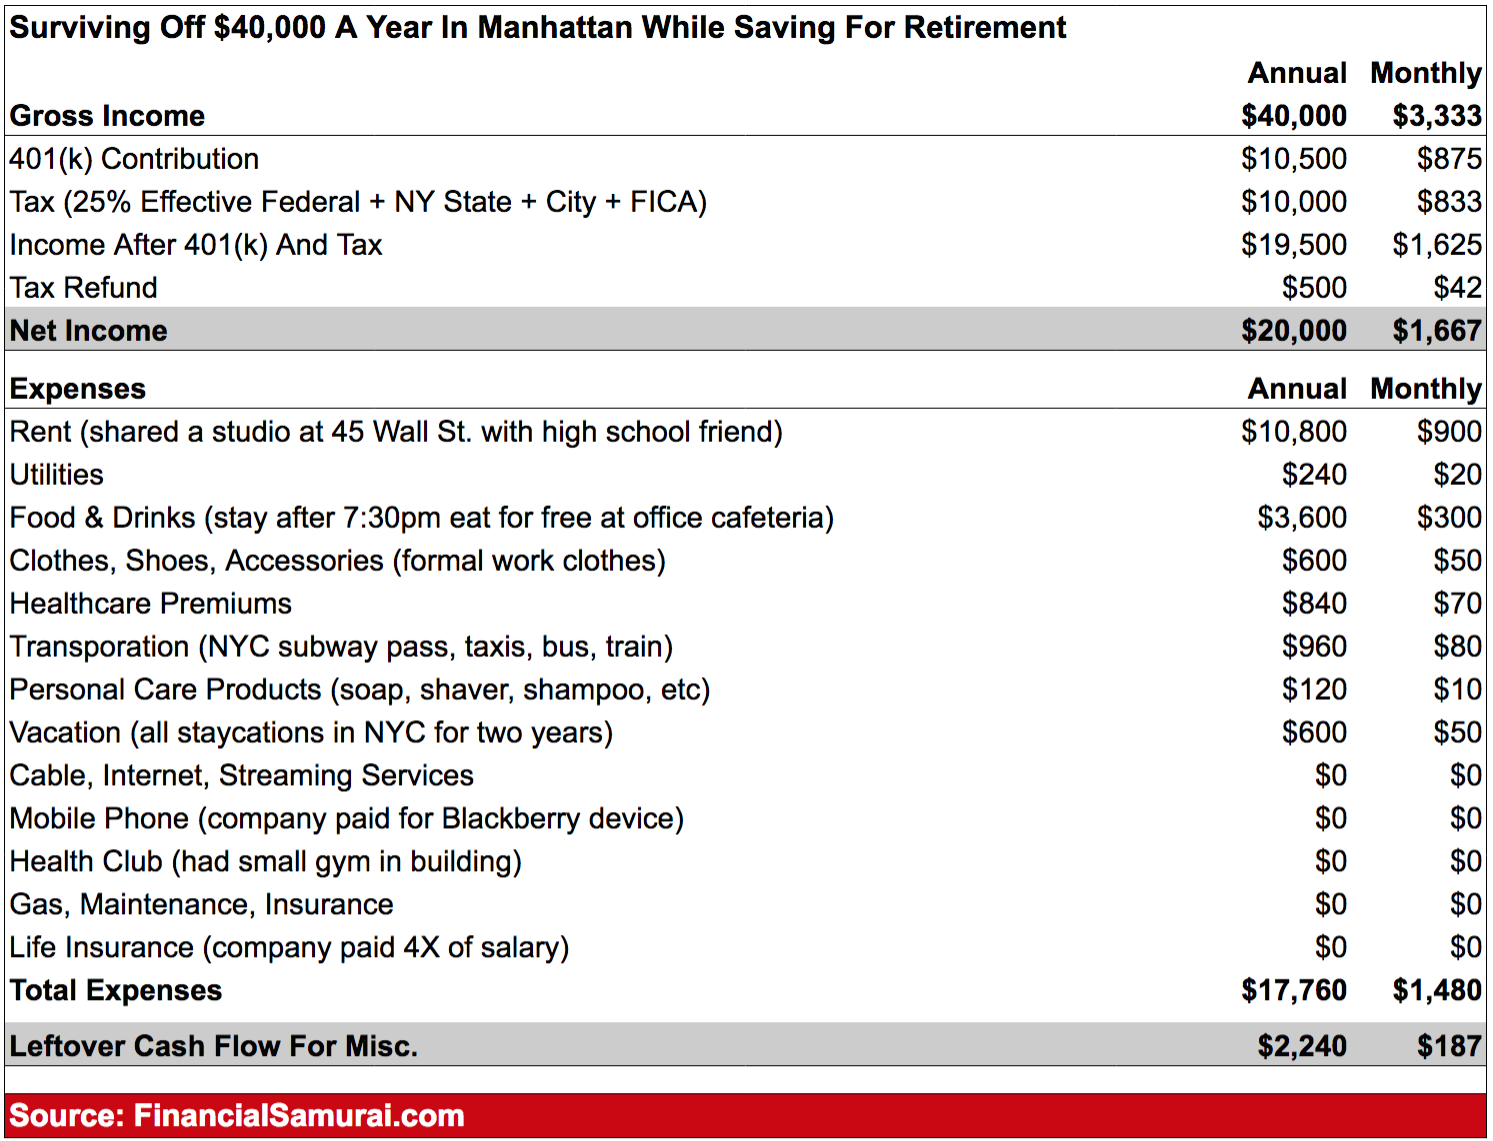 Achieving financial independence on $40,000 a year living in Manhattan